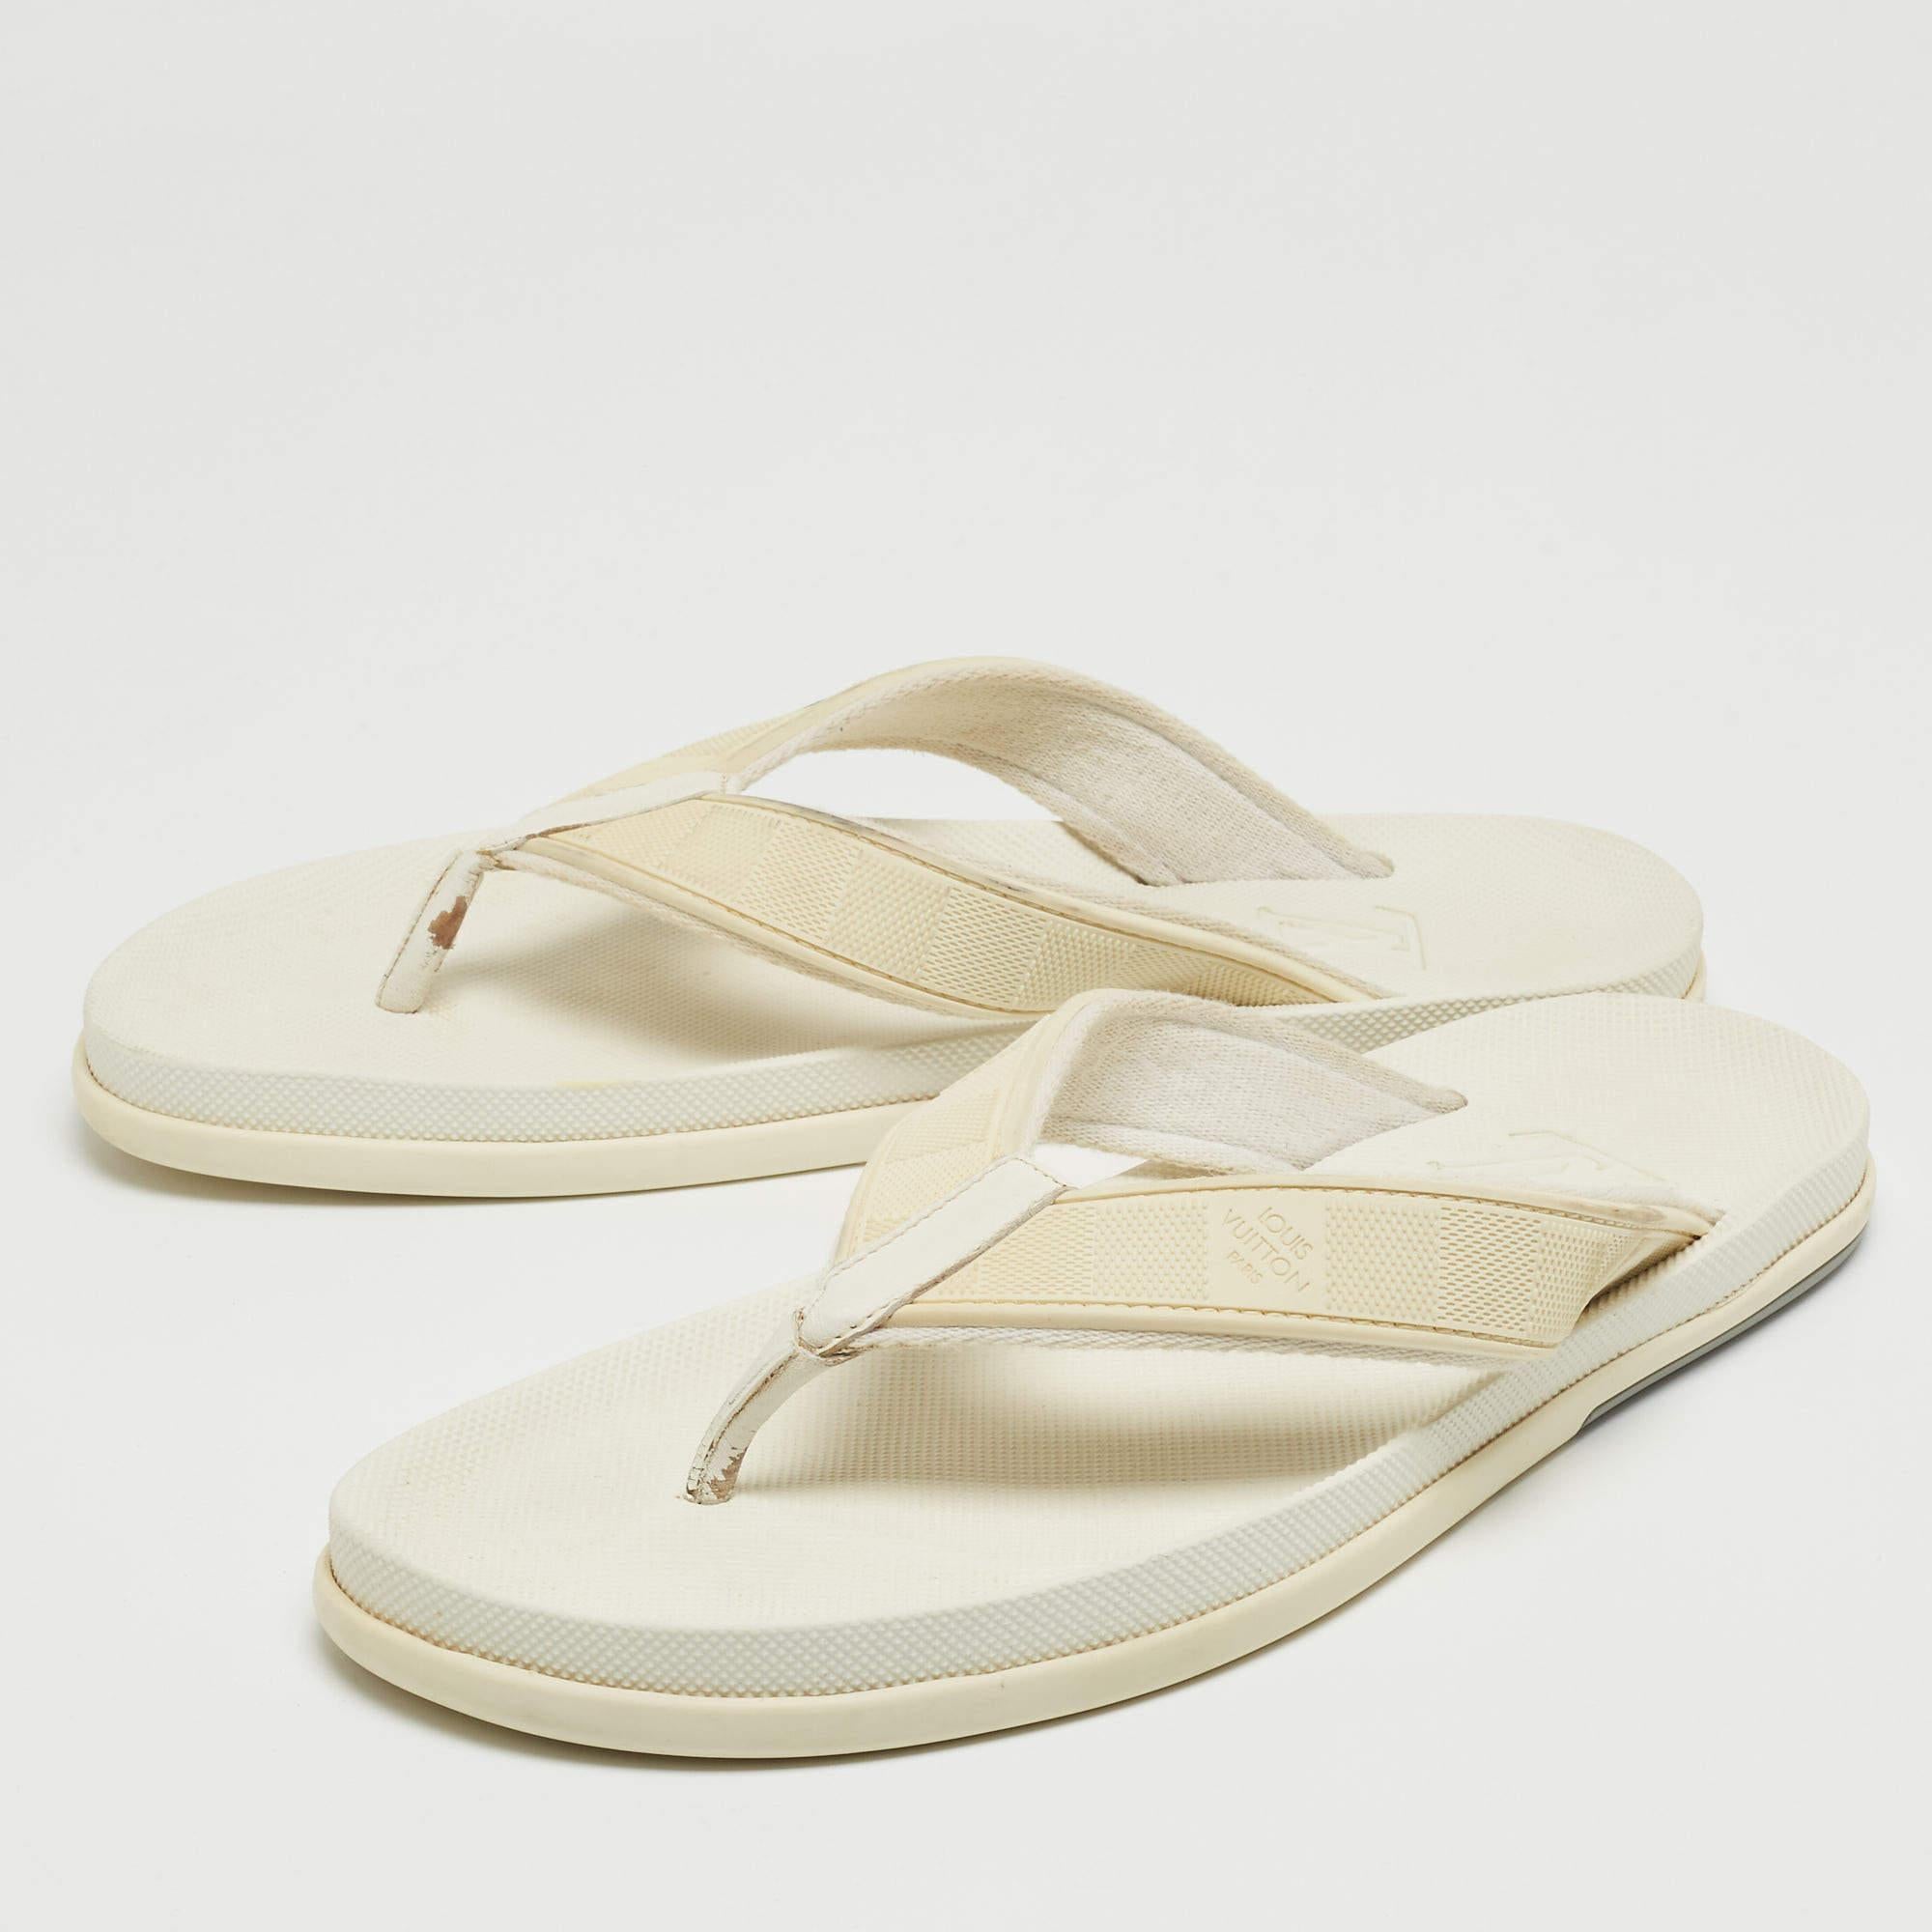 Louis Vuitton's flats for men are made of rubber and leather, with Damier detailing on the uppers. They're perfect for the beach, vacation days, or everyday use.

